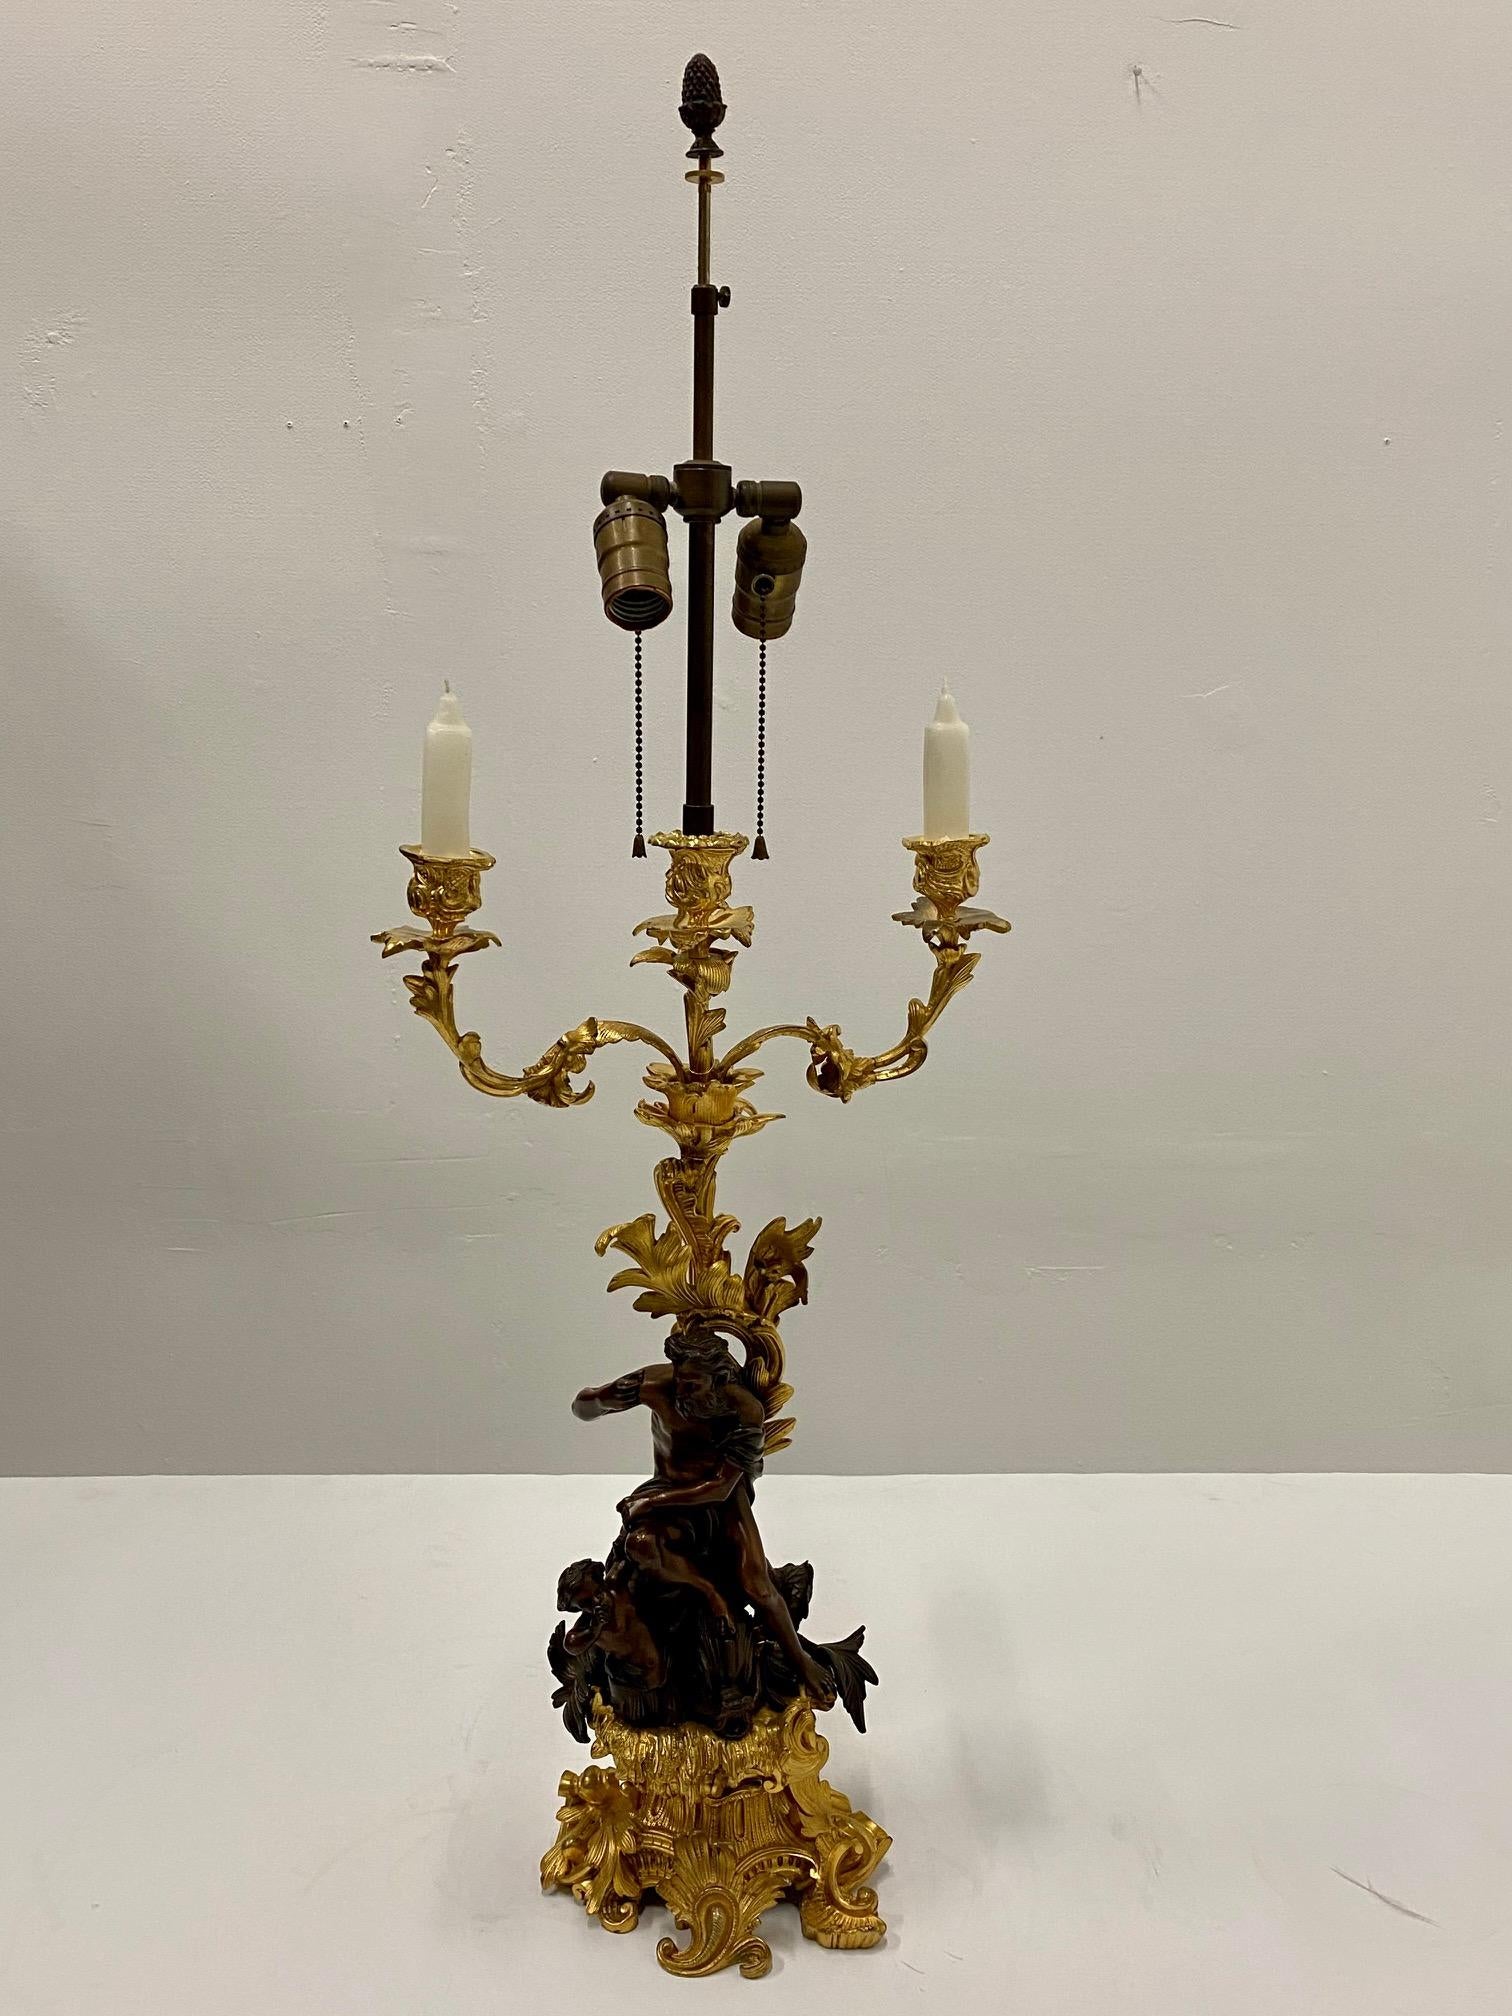 Rococo Ornate Antique French Gilt & Patinated Myth Inspired Bronze Candlestick Lamp